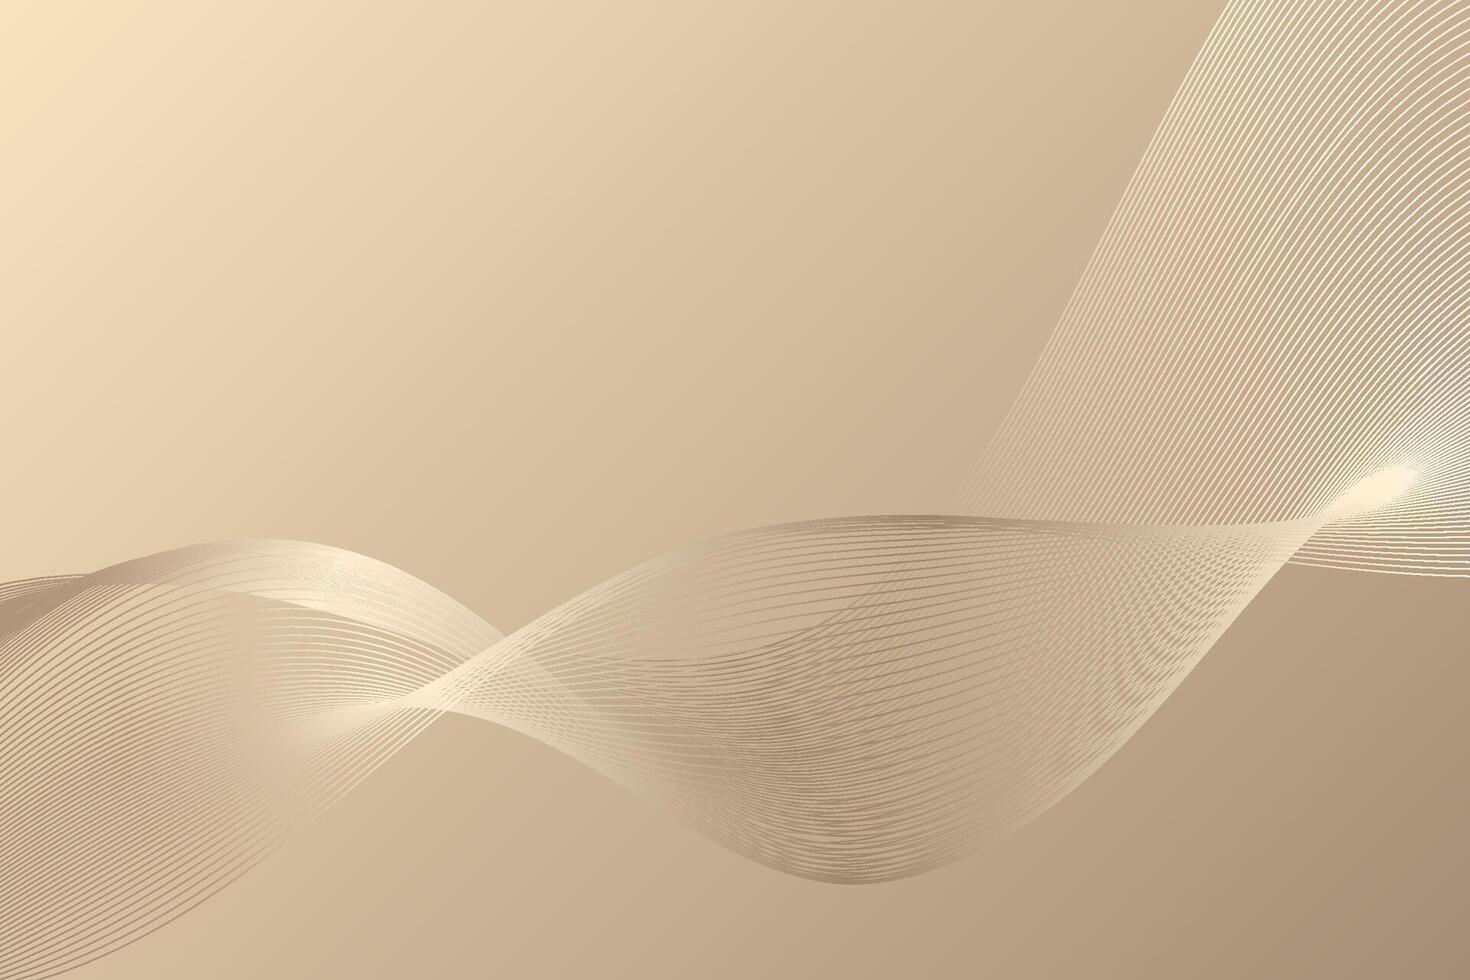 Abstract vector background of a luxurious golden grid wave with smooth, curved outlines and a glowing, shiny royal gradient effect